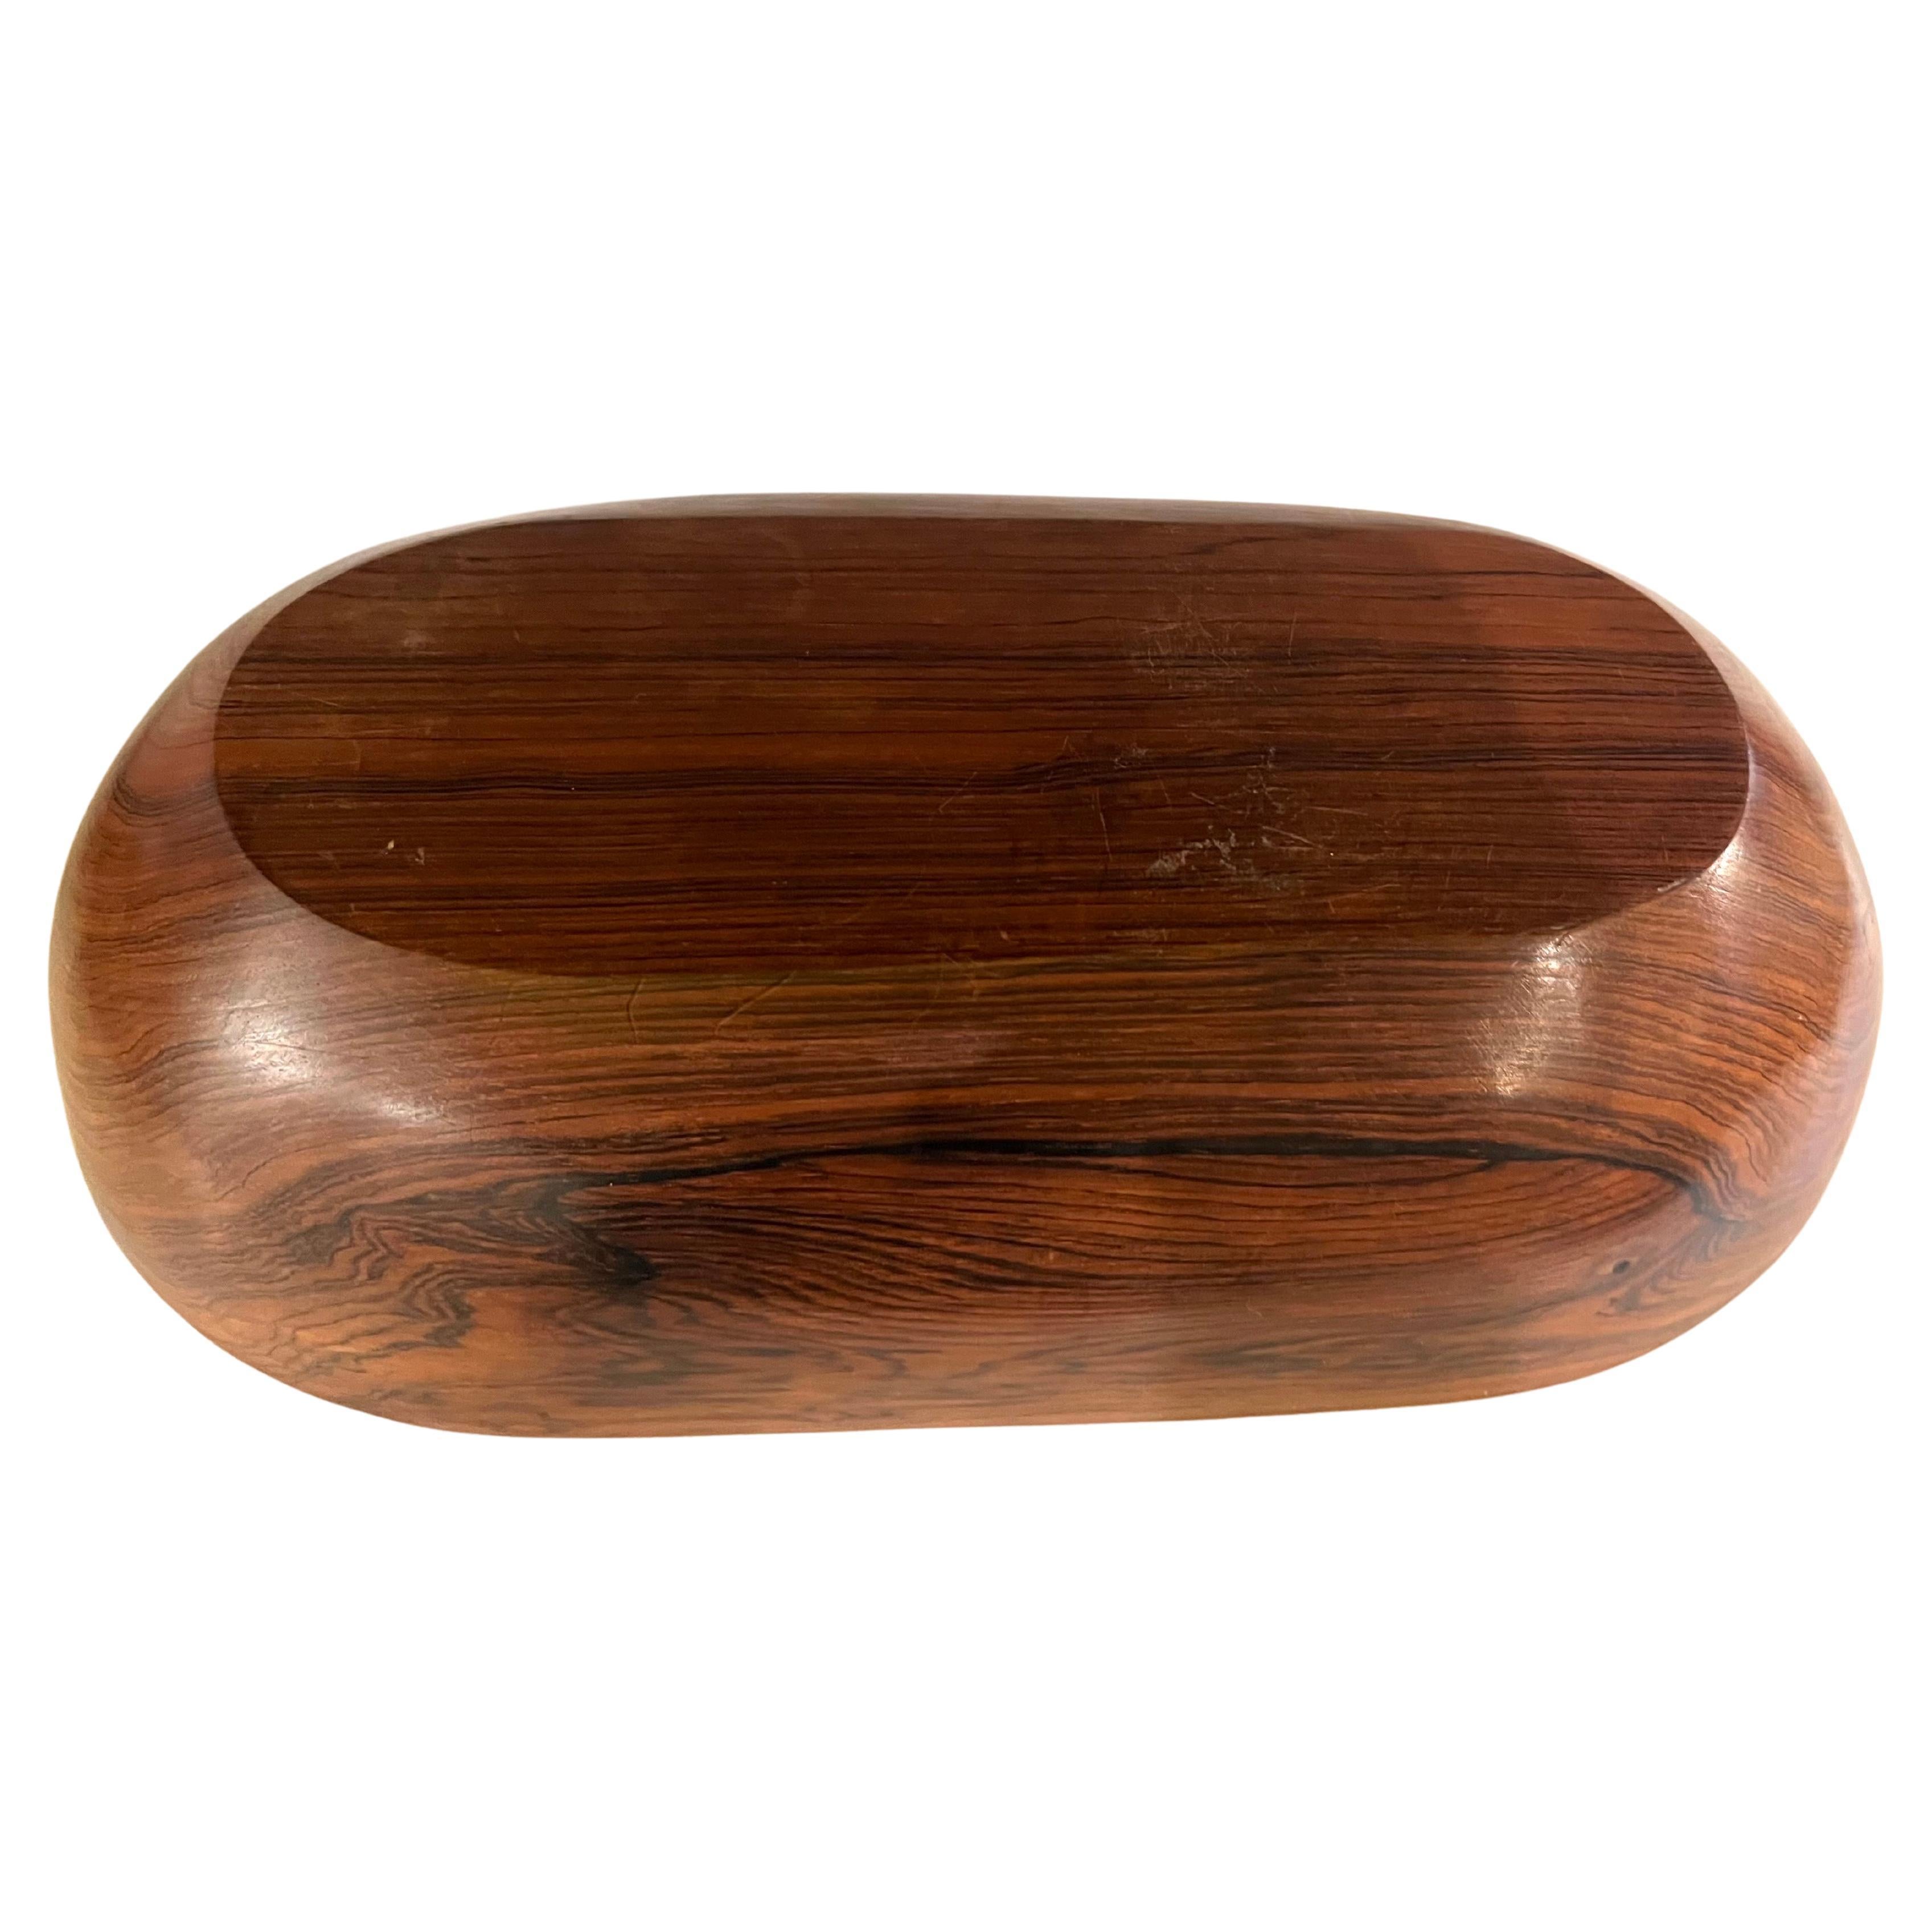 Beautiful elegant solid rosewood carved oval bowl, gorgeous grain and great condition simple design.